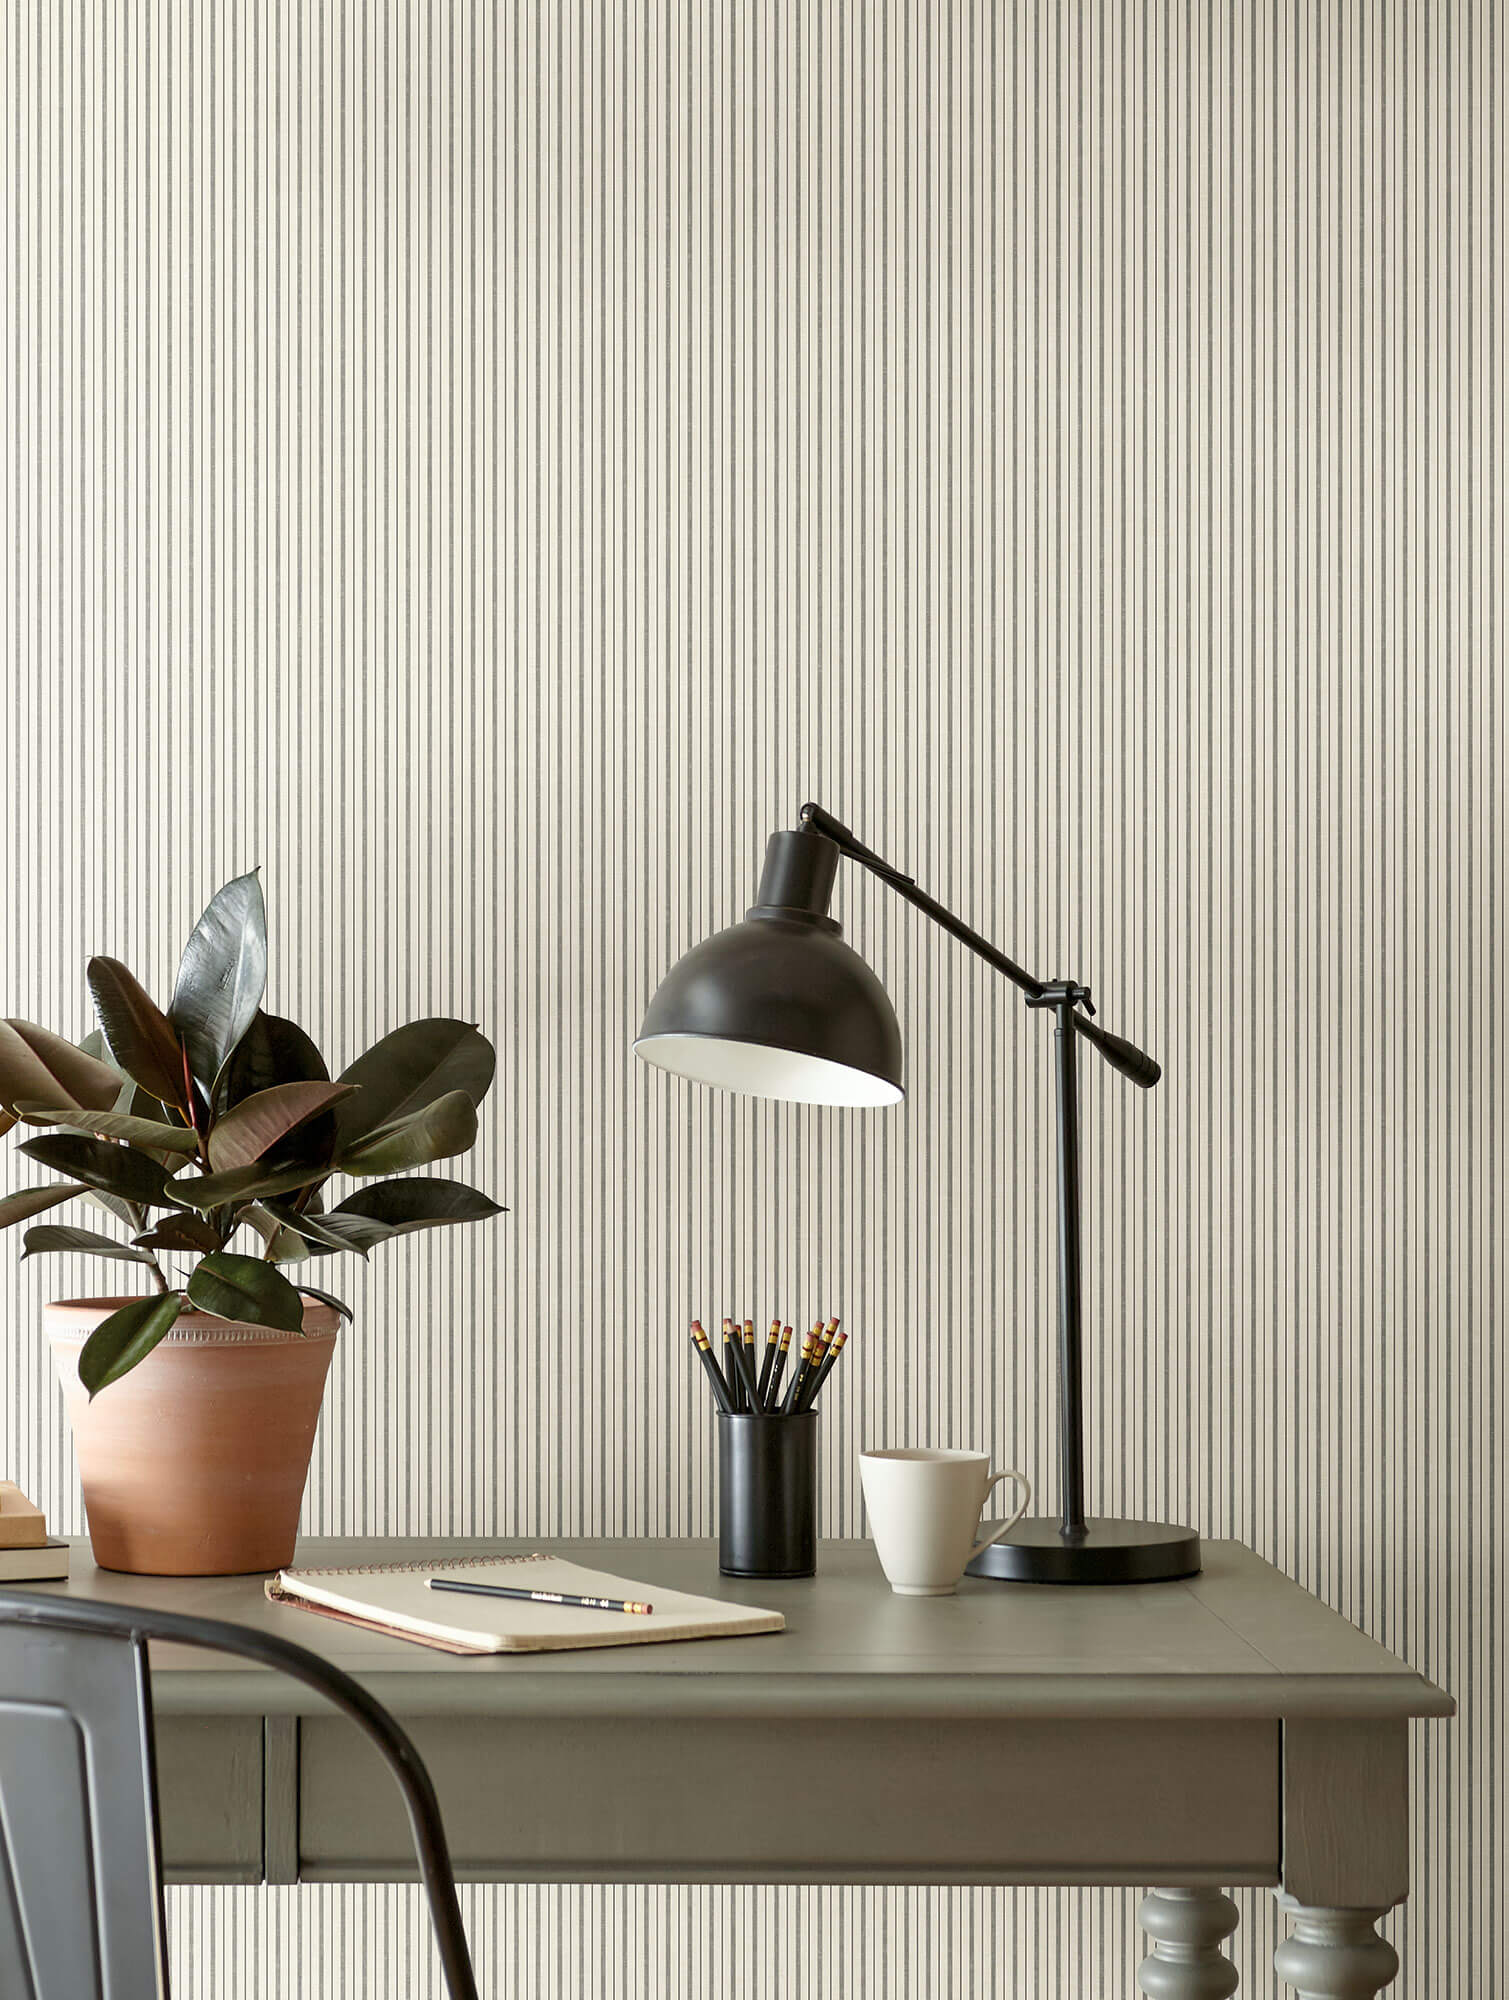 York Wallcoverings MH1510 Magnolia Home The Daily Removable Wallpaper Gray/ Black